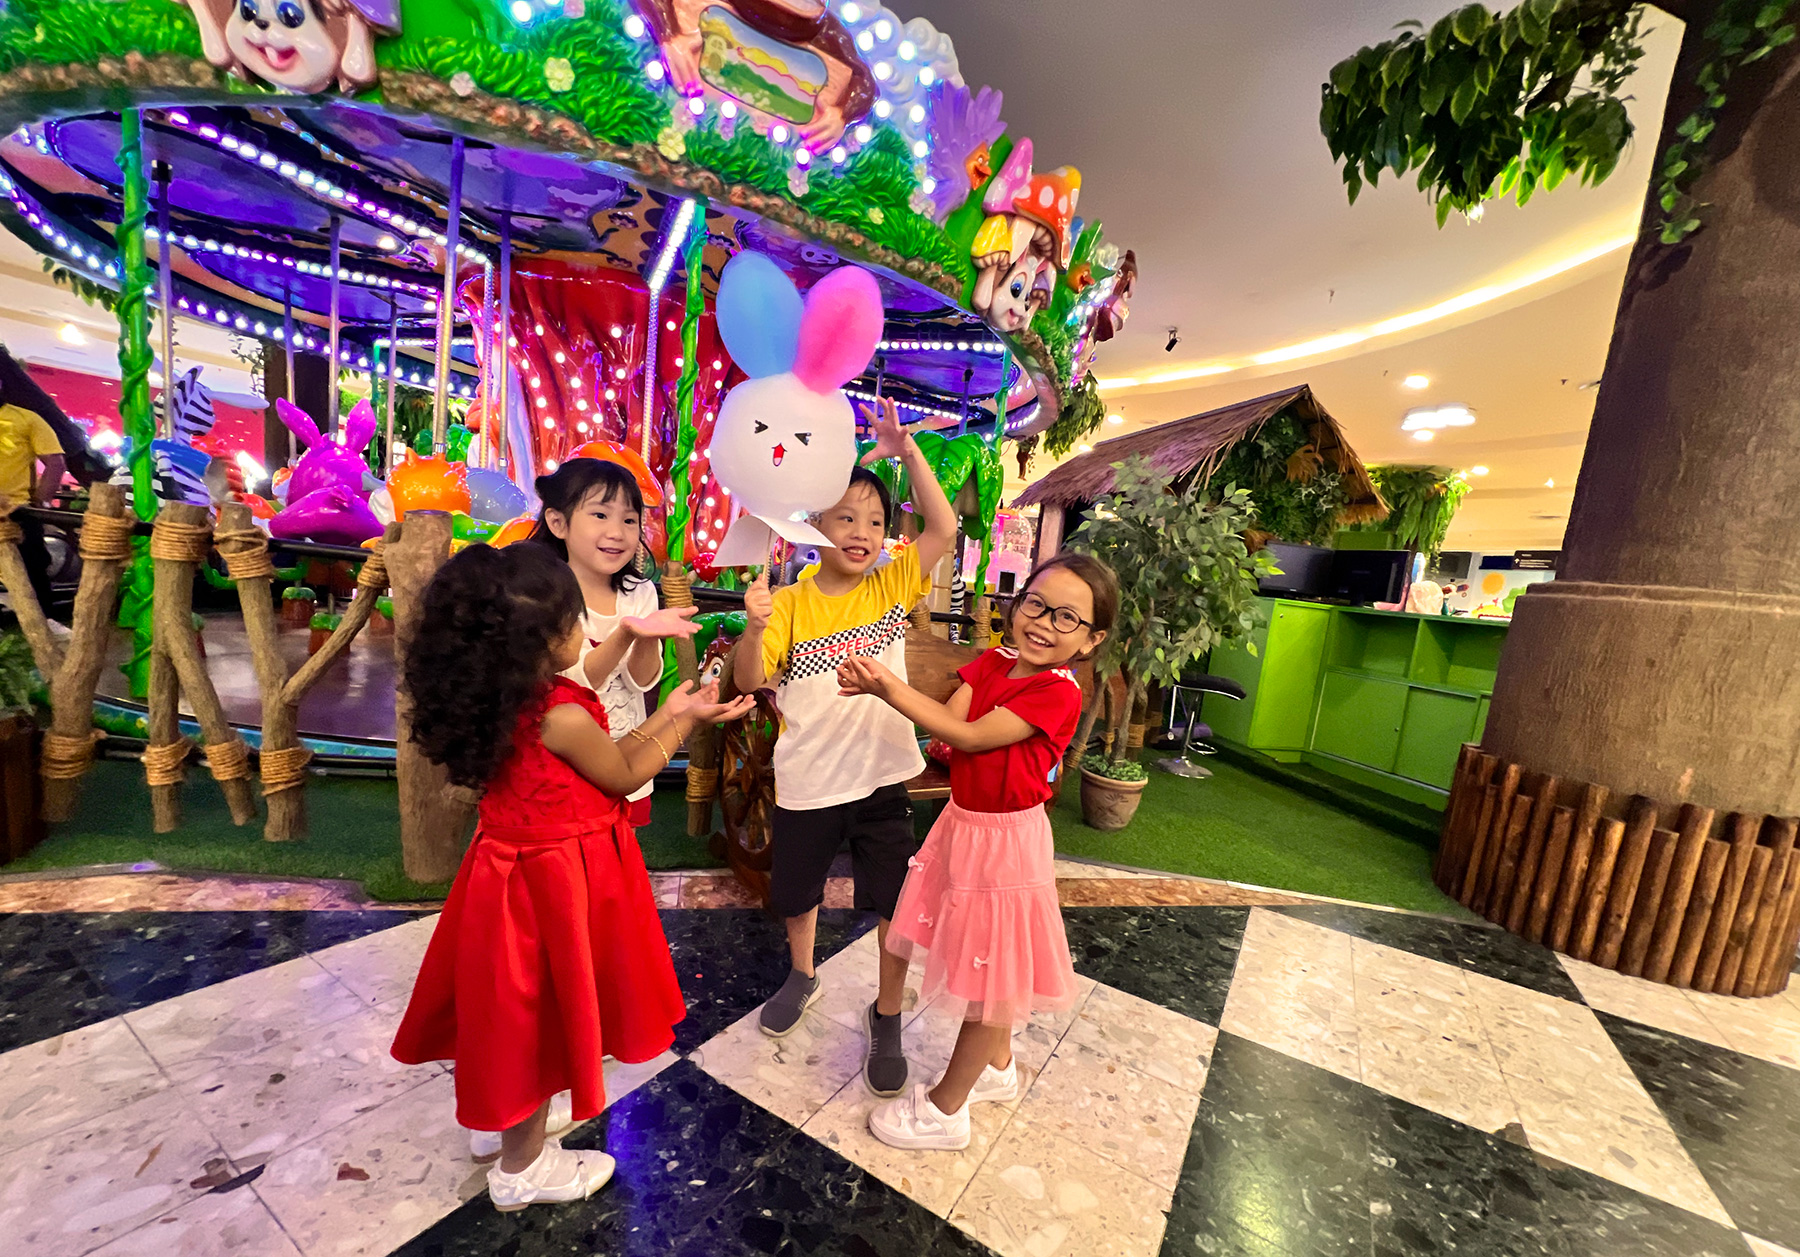 Sunway Pyramid - It’s not everyday you can find a bunny cotton candy for your little ones!